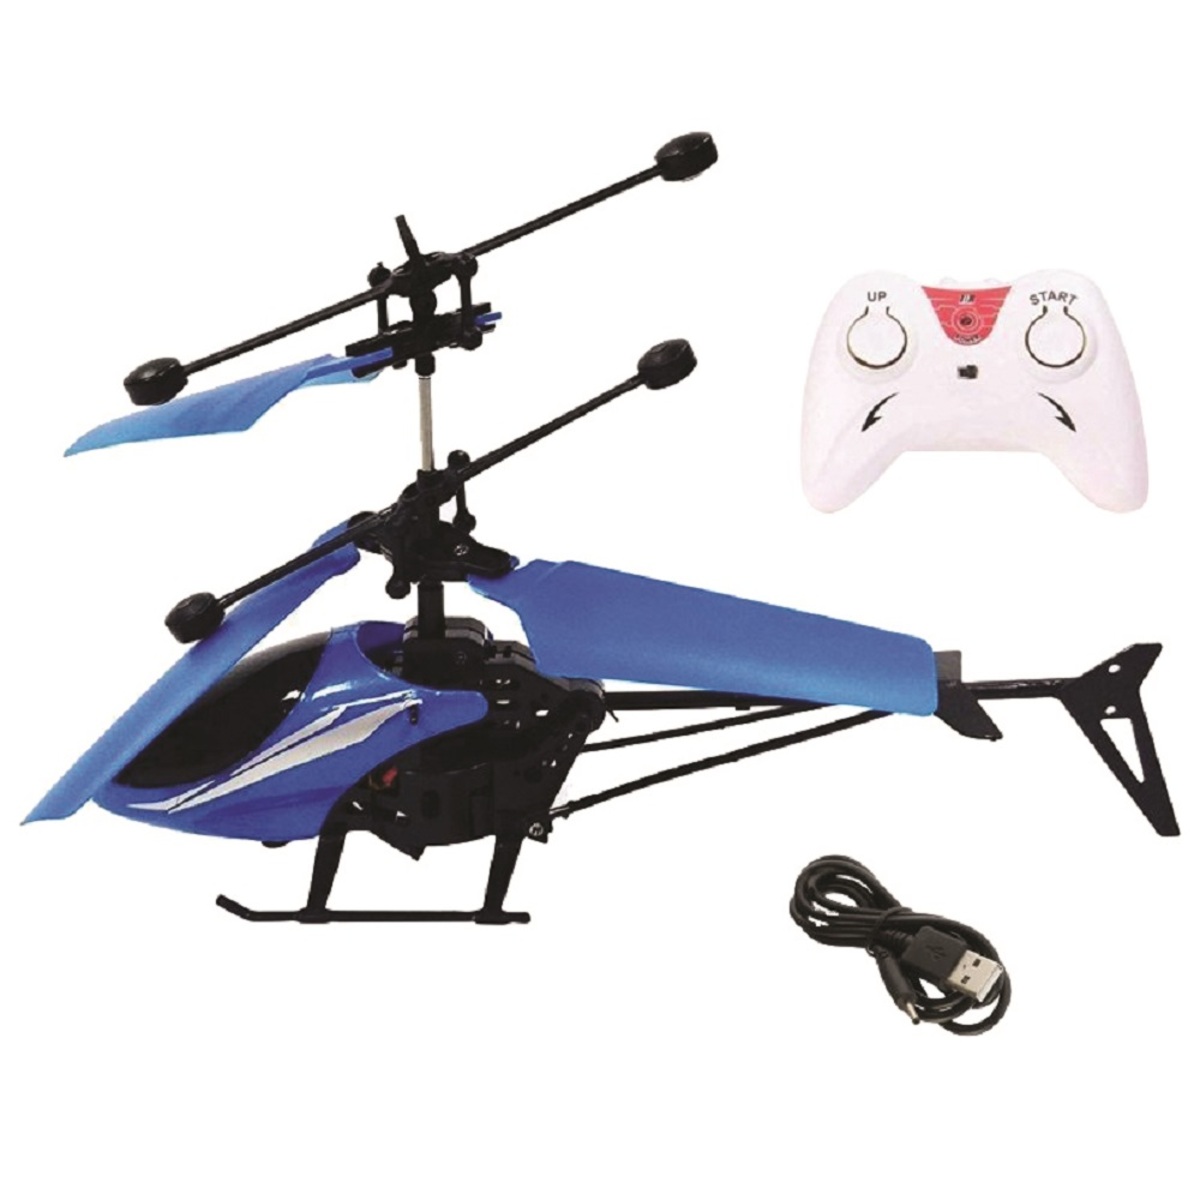 Skid Fusion Excees RC Helicopter LH-1802